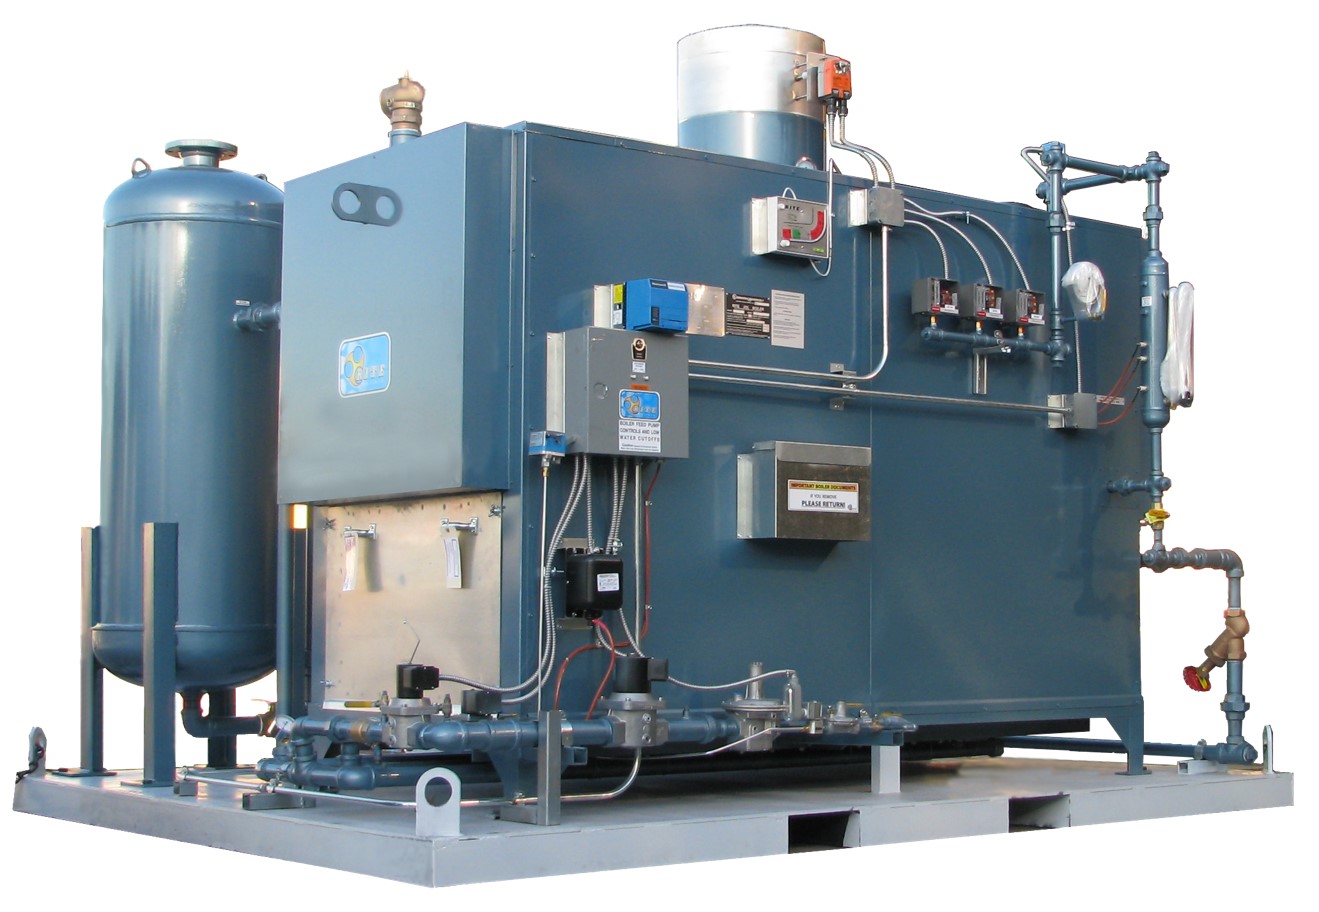 A partial low pressure steam system skid with automatic stack damper